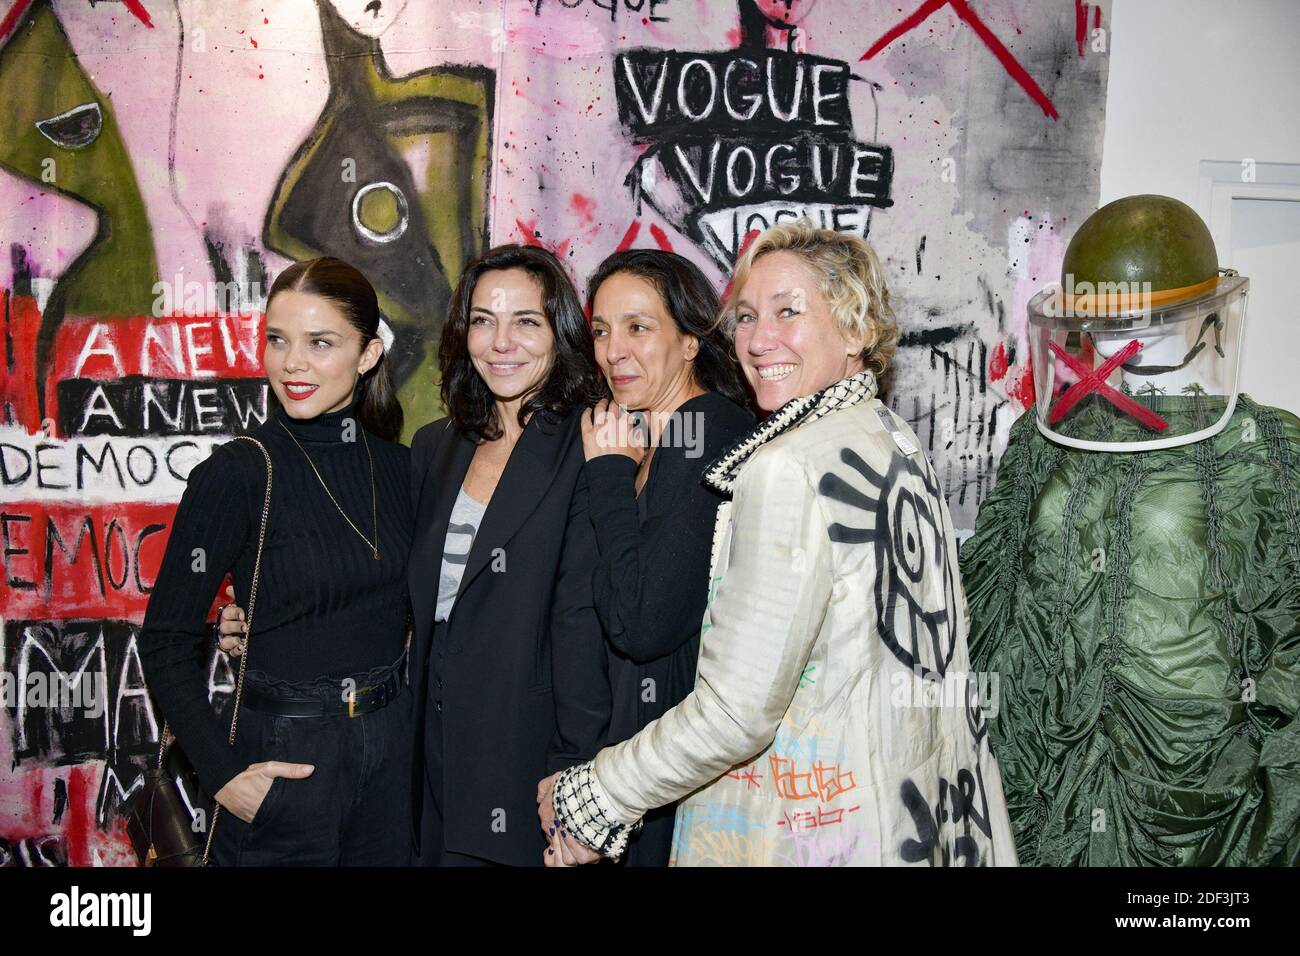 Sandra Sisley, Alexandra Senes with friends on vernishing of the Pop Up  Store Madame X -Maé dedicated to the Madonna tour, showing Mae Couture  clothes designed for the tour, in Paris March